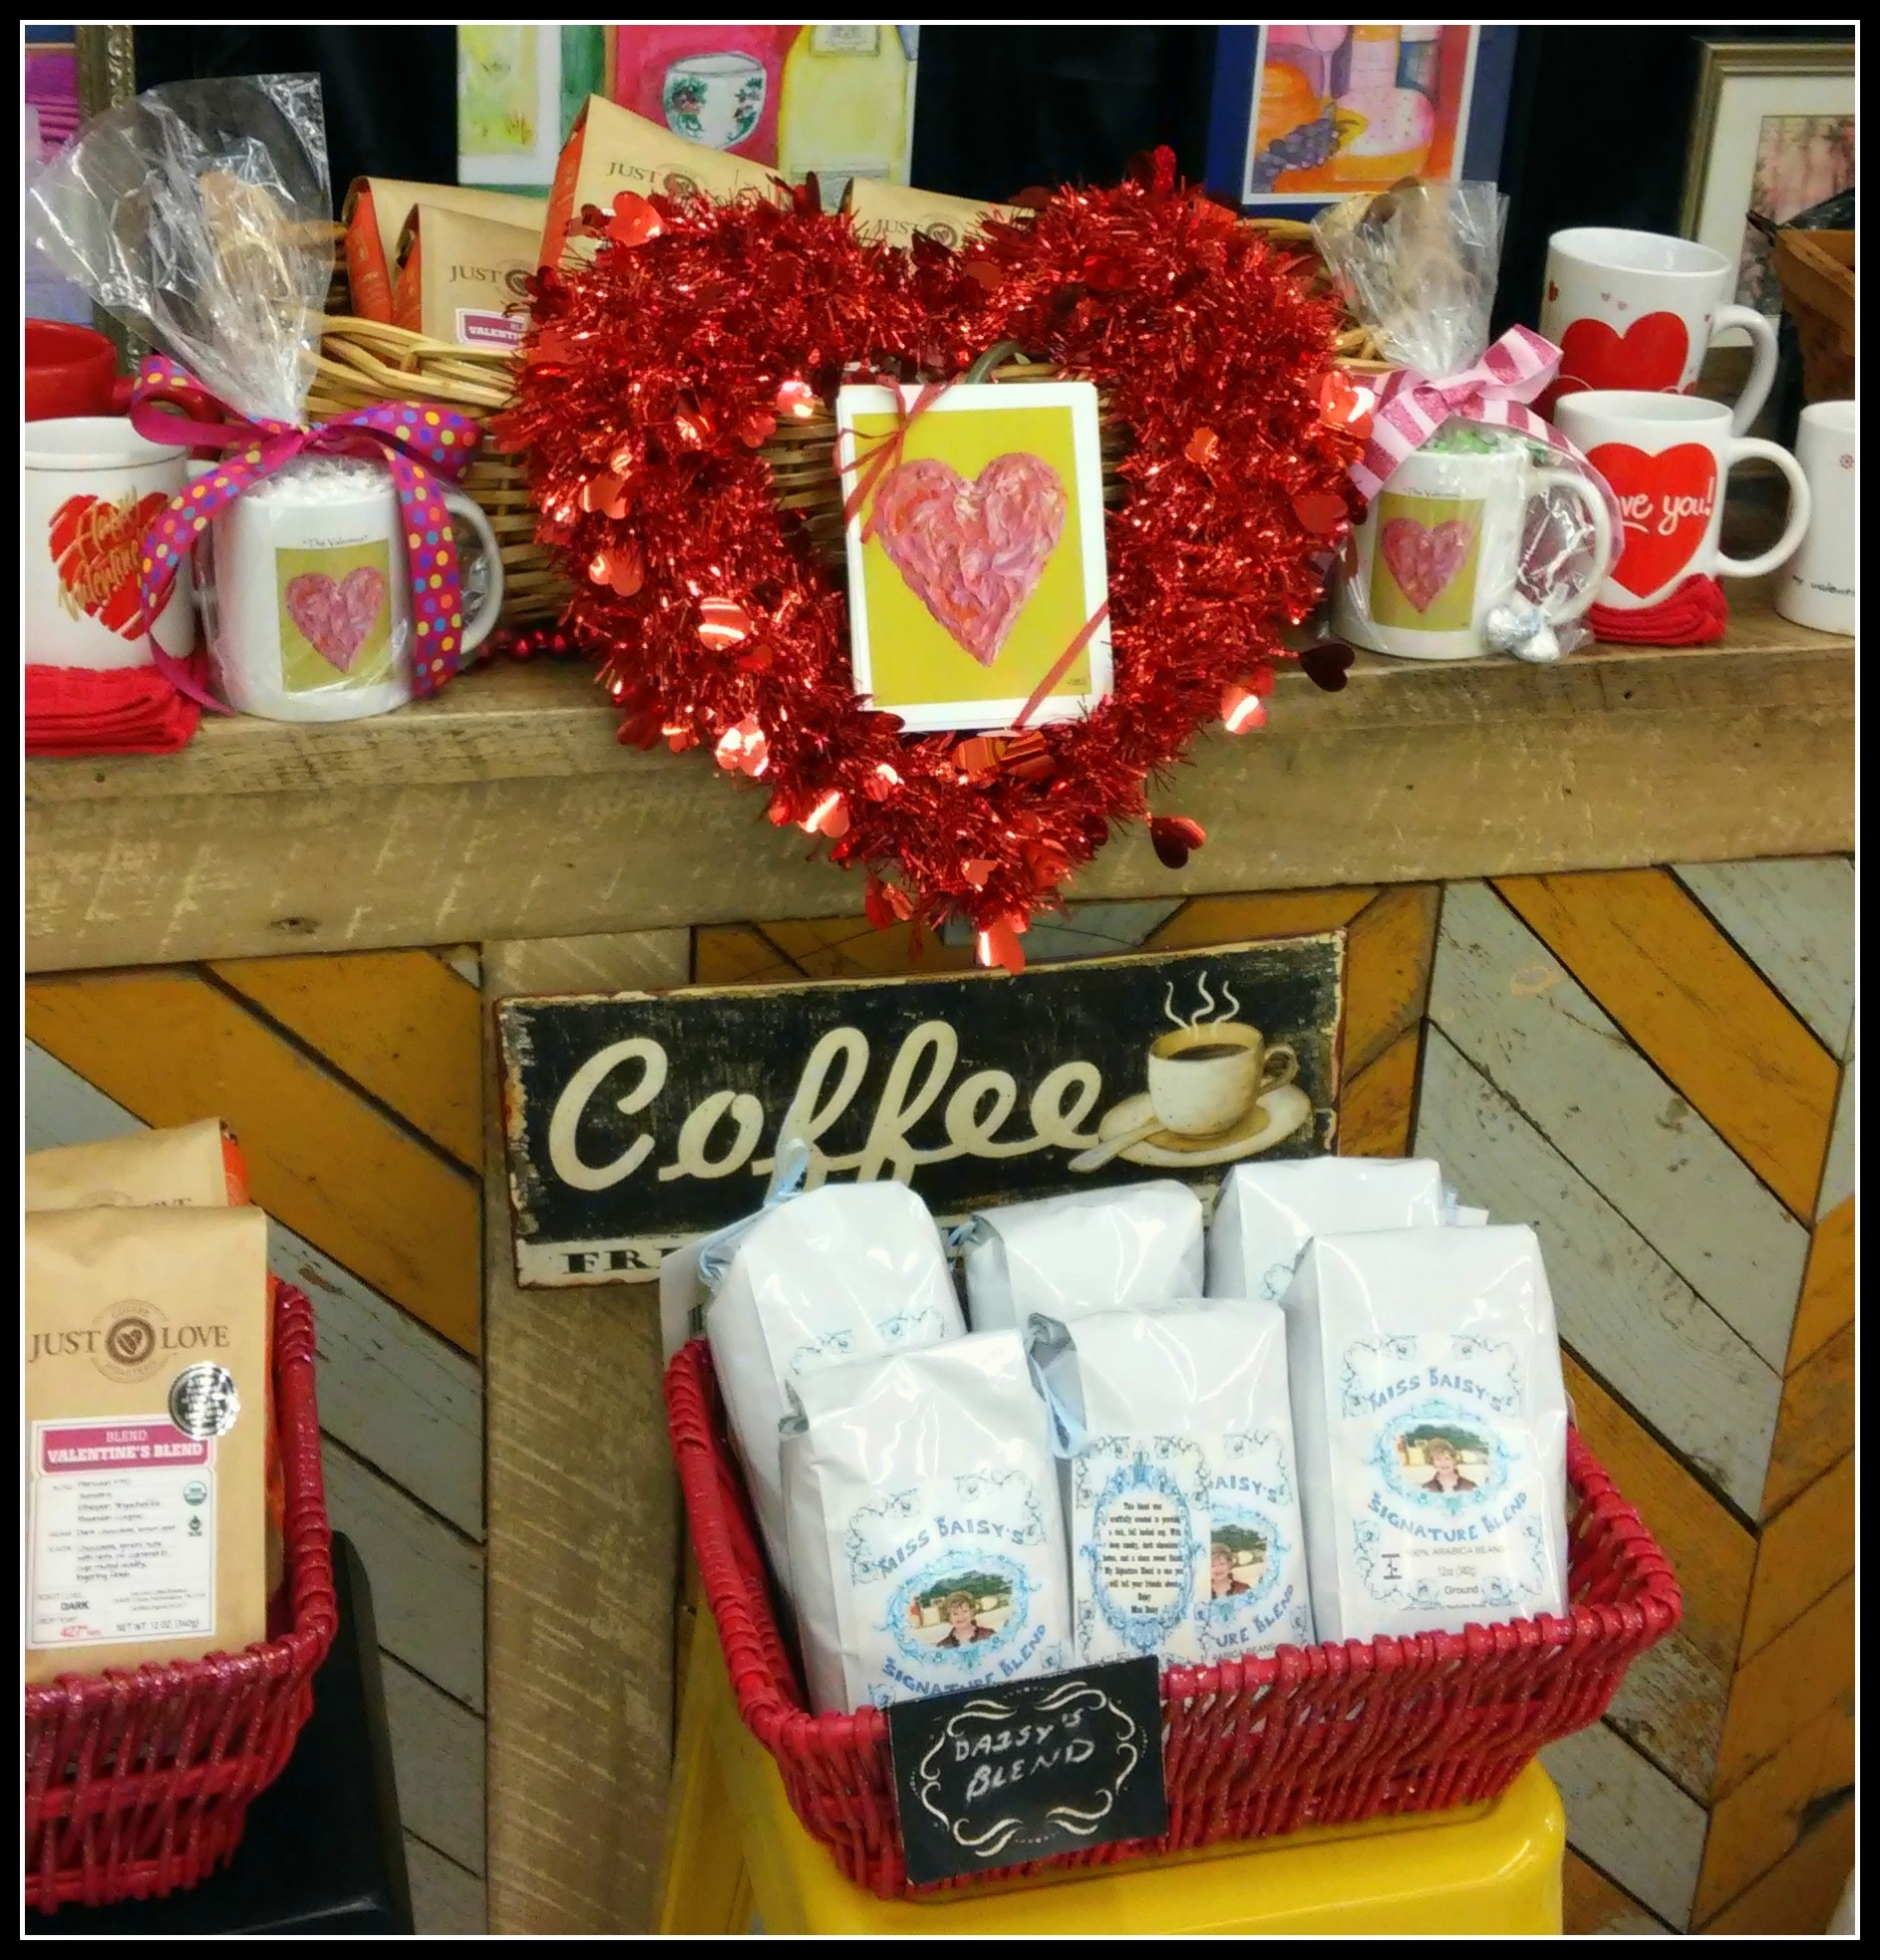 Miss Daisy's New Coffee Blend is delicious inside "The Valentine" coffee cup! Try Daisy's Blends today!!! Grassland's Foodland Market, Franklin, TN.